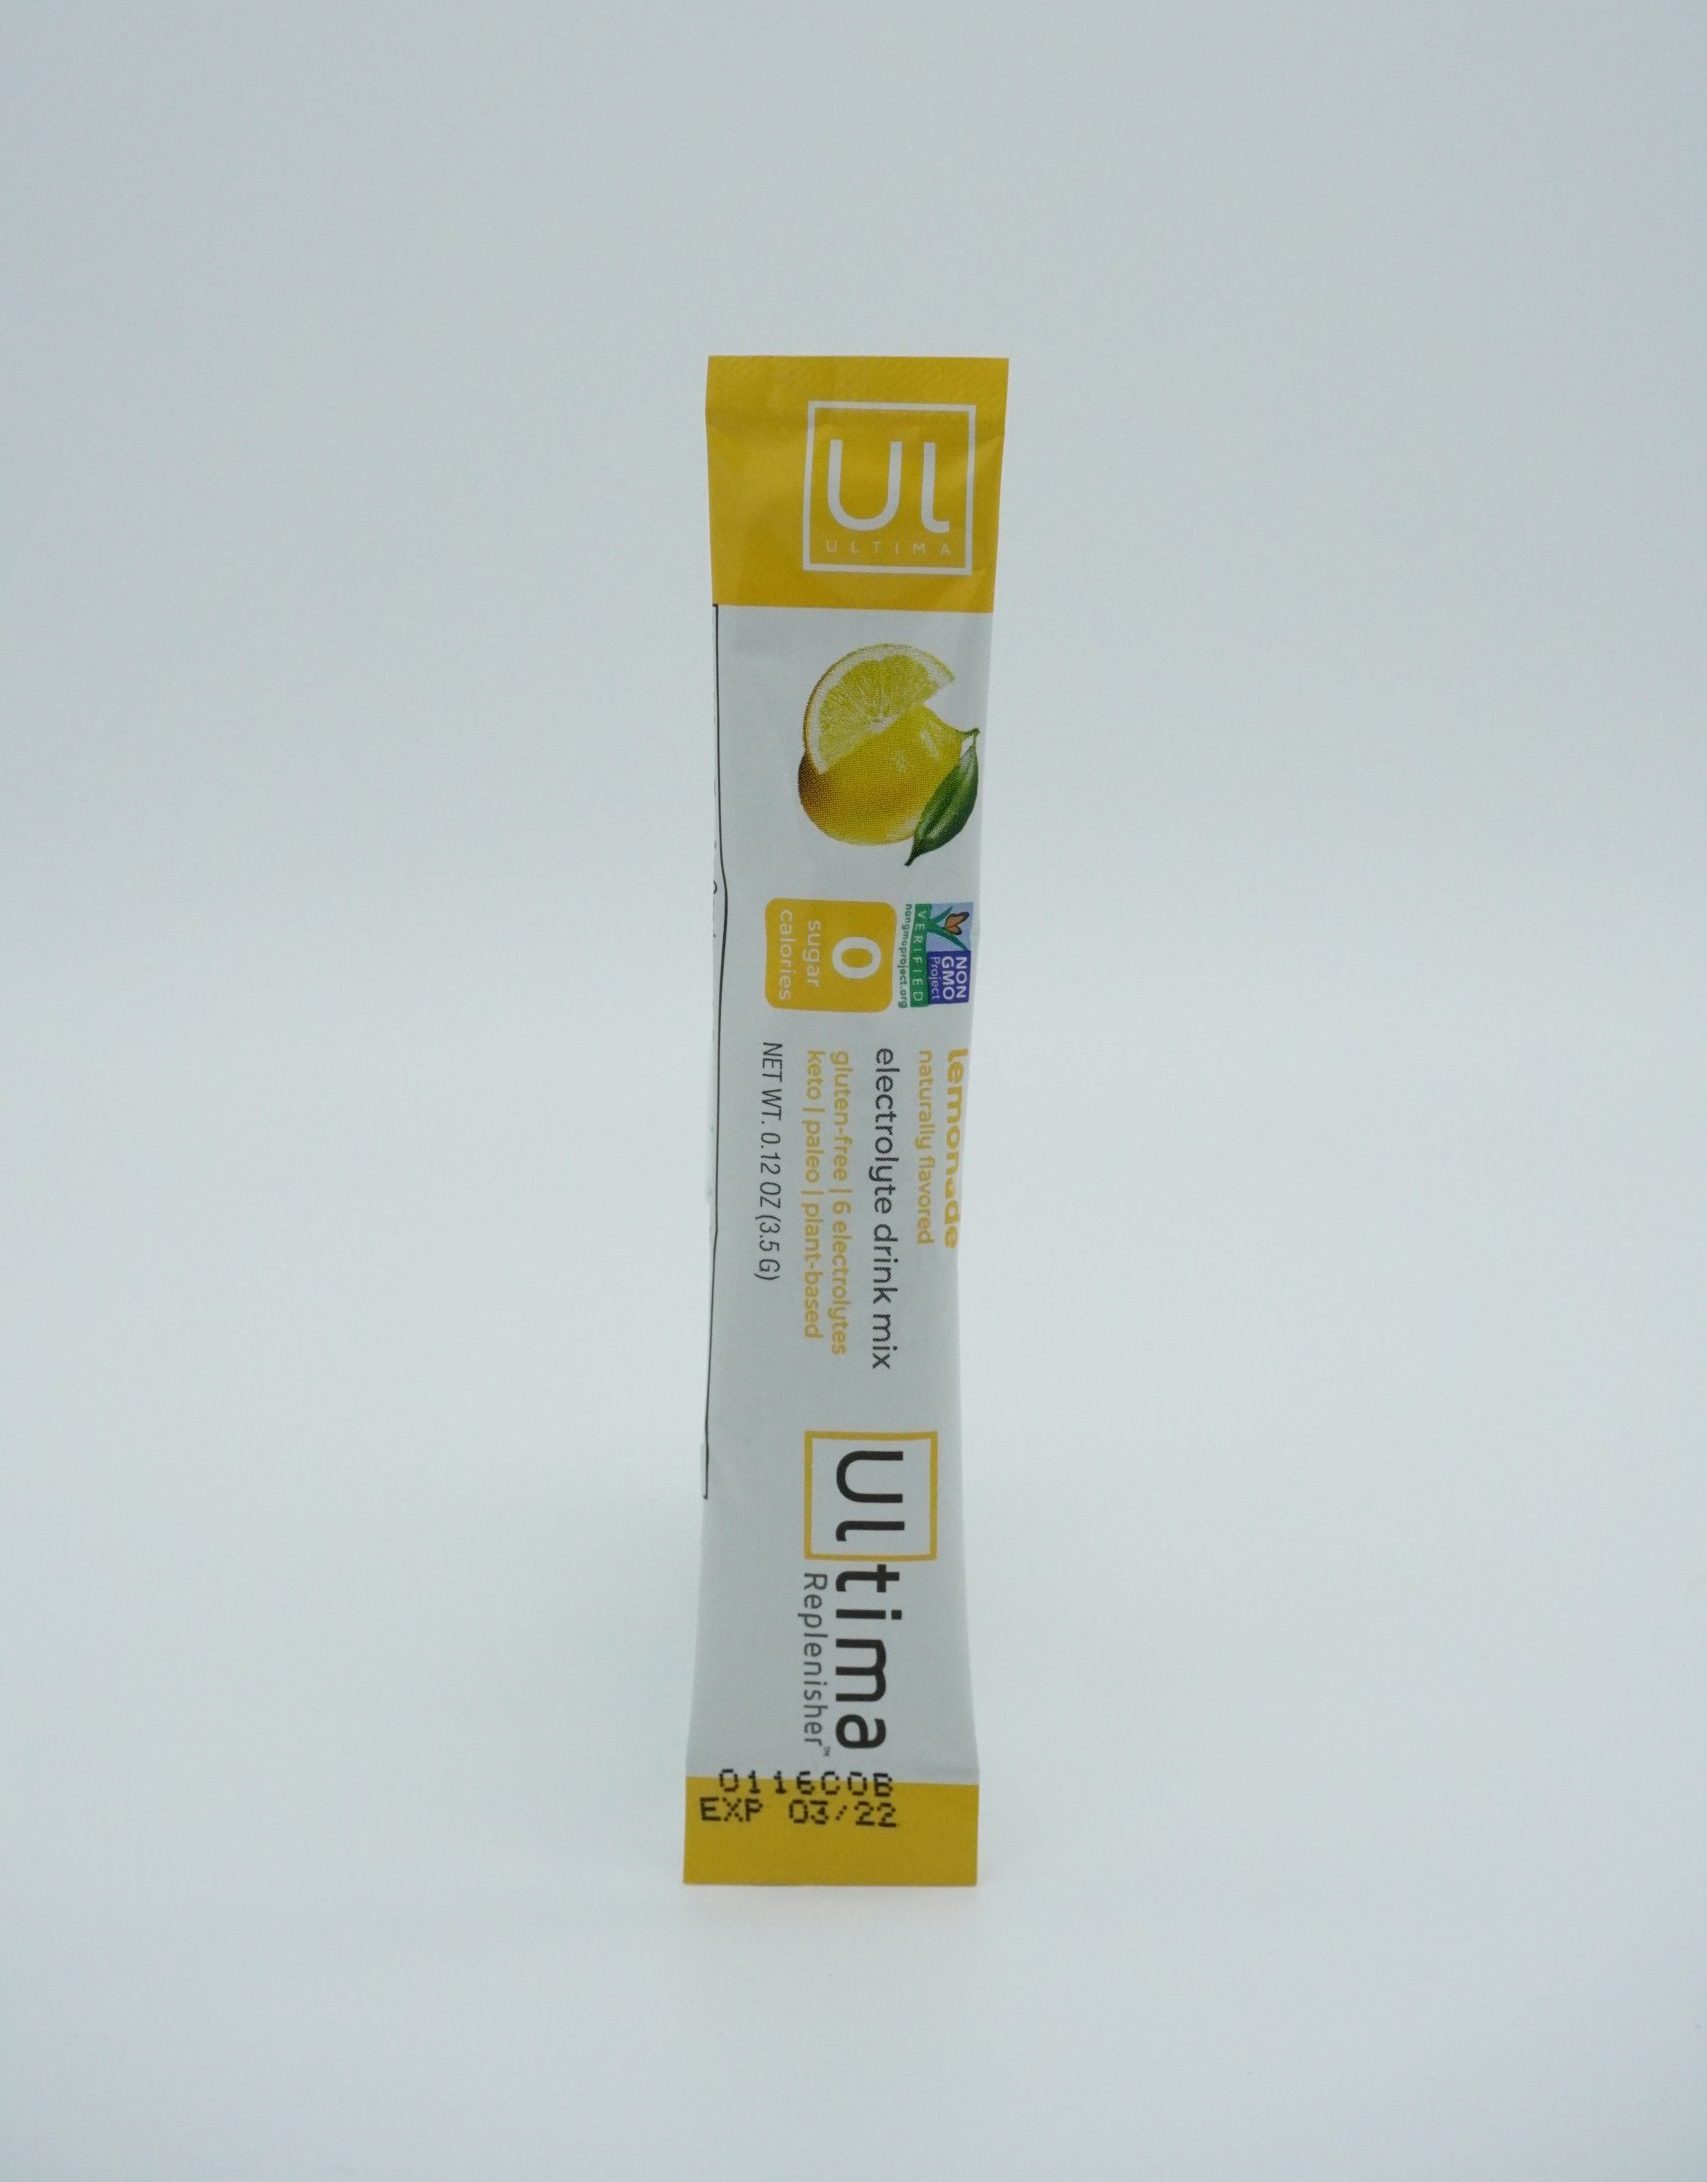 Electrolyte Powder and Hydration Packets - Ultima Replenisher